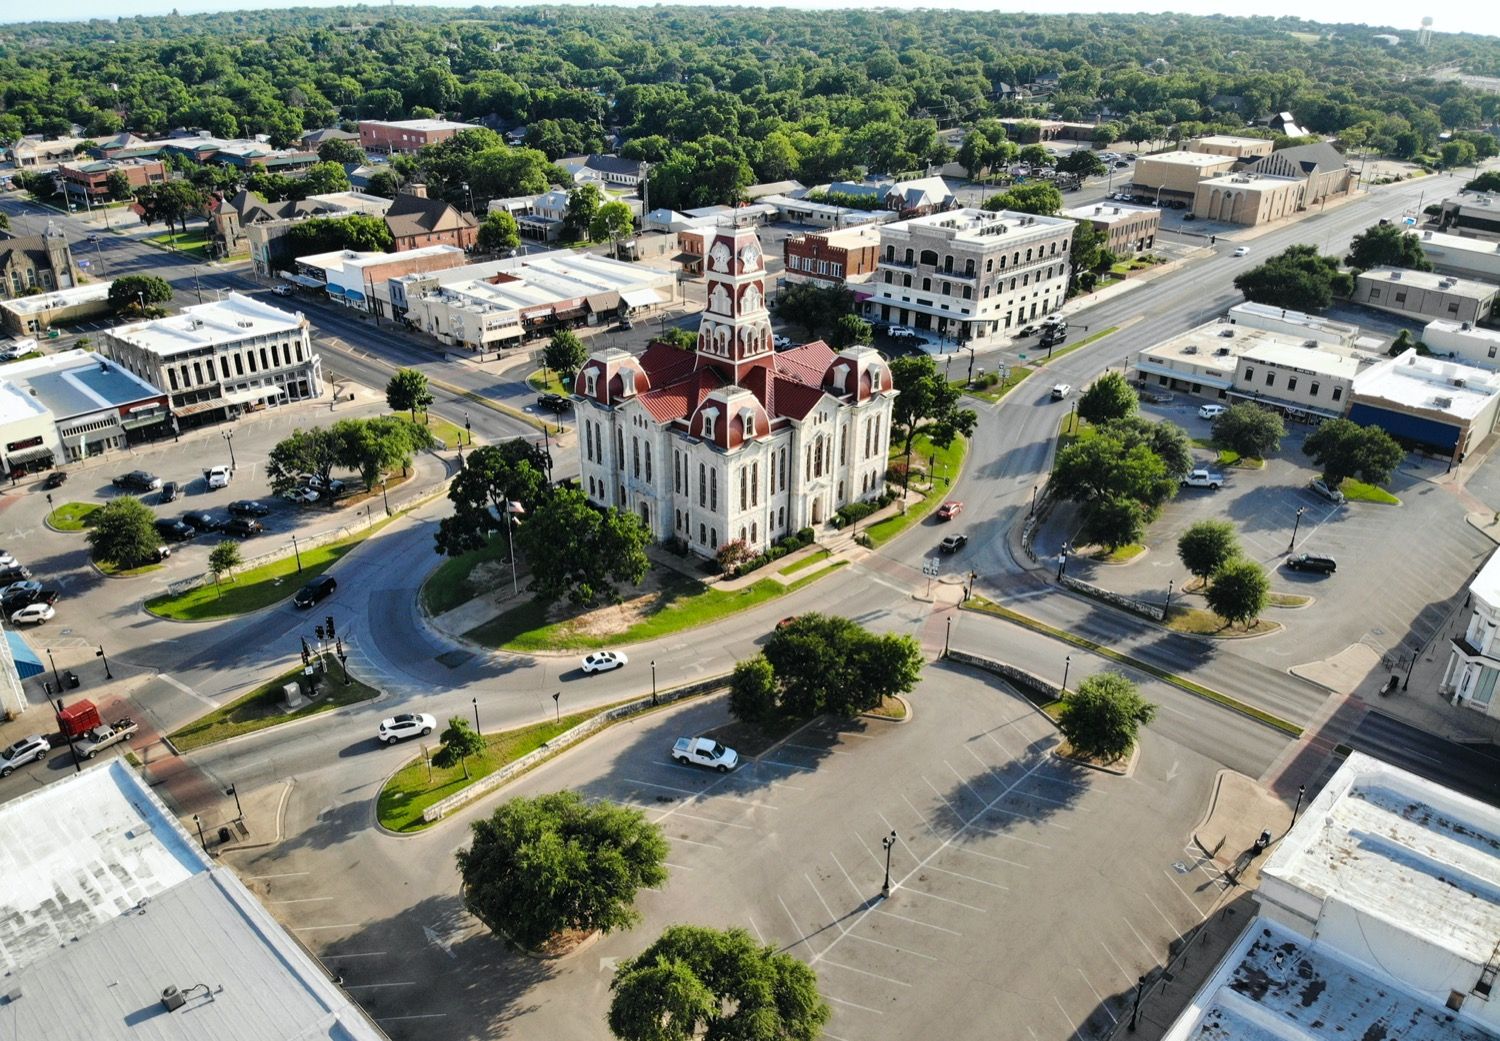 overview of Weatherford Texas with various buildings and parking lots